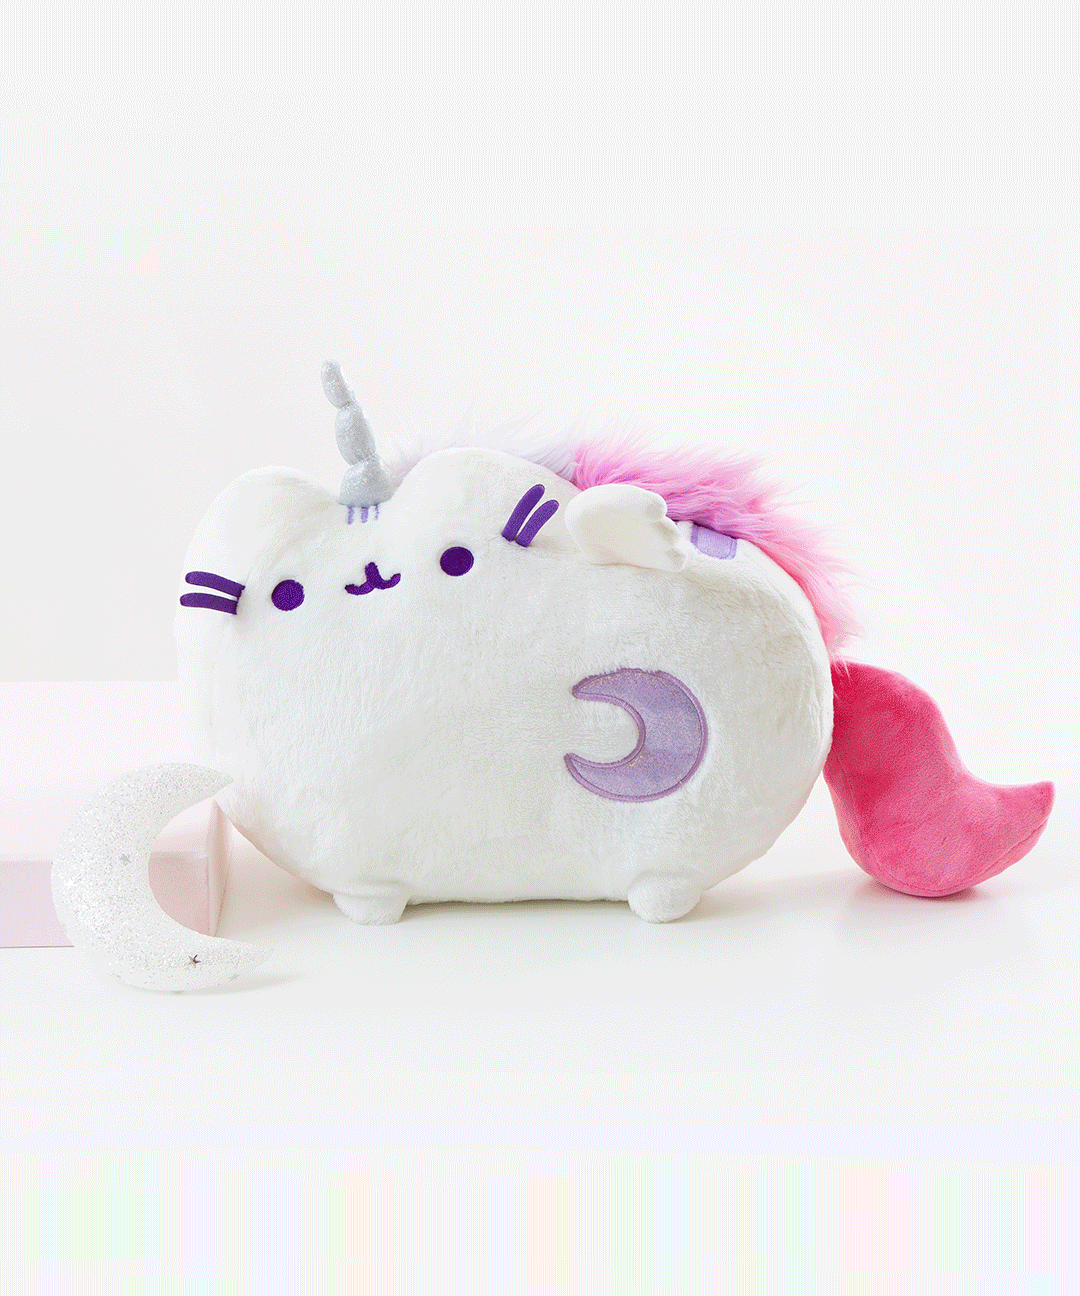 Unicorn Keyring Glowing Horn Magical Sounds